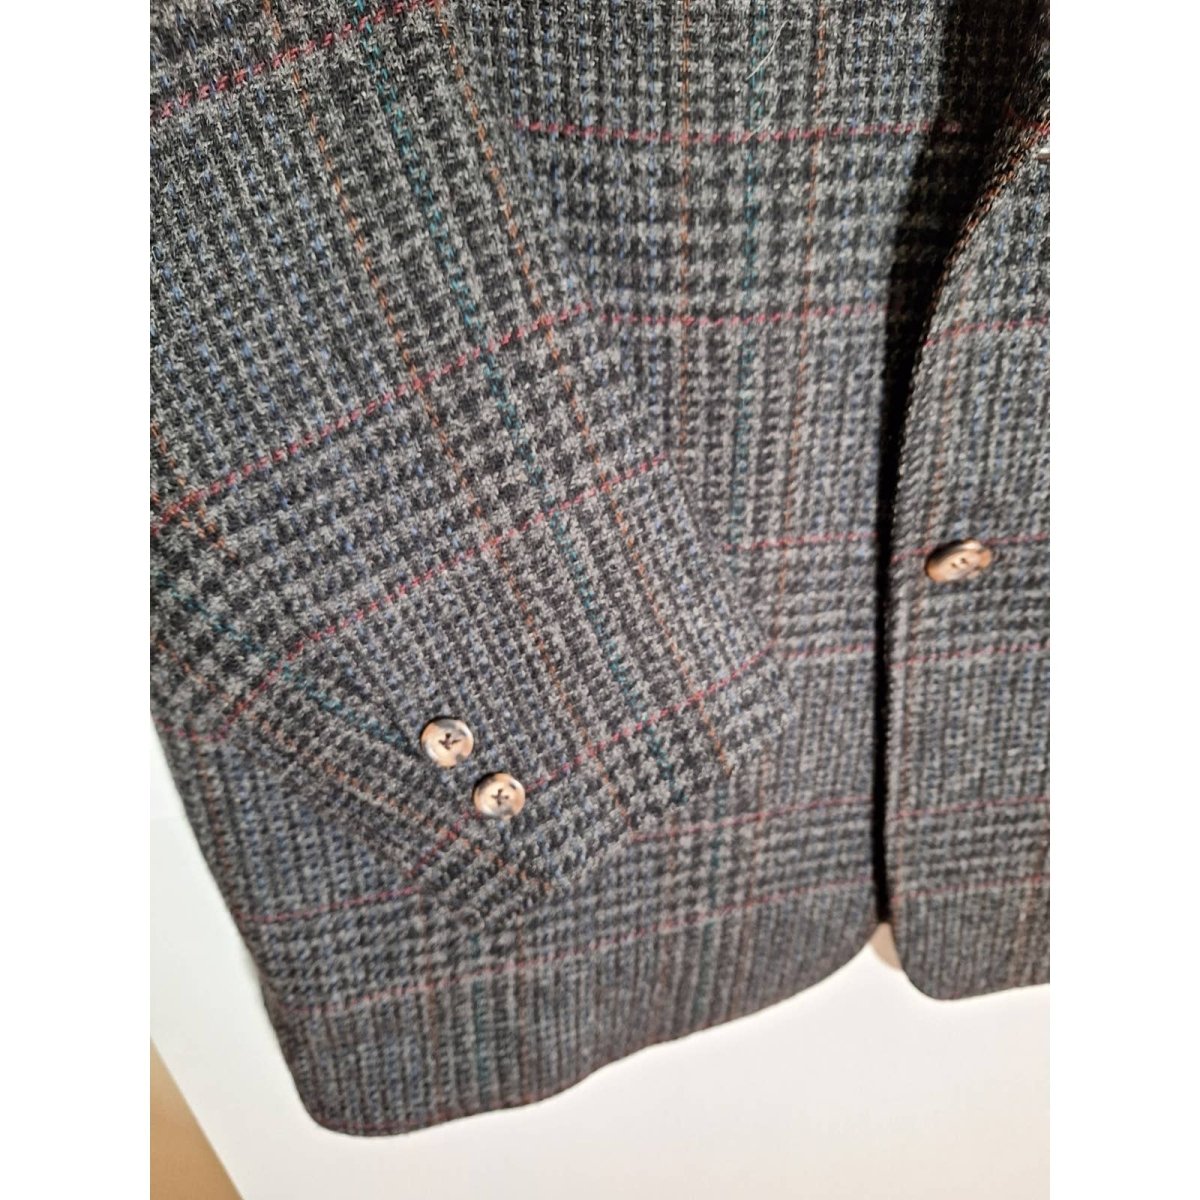 Vintage 80s/90s Brooks Brothers Wool 3 Button Sport Coat Rainbow Threaded Tweed Size 44-46L themallvintage The Mall Vintage